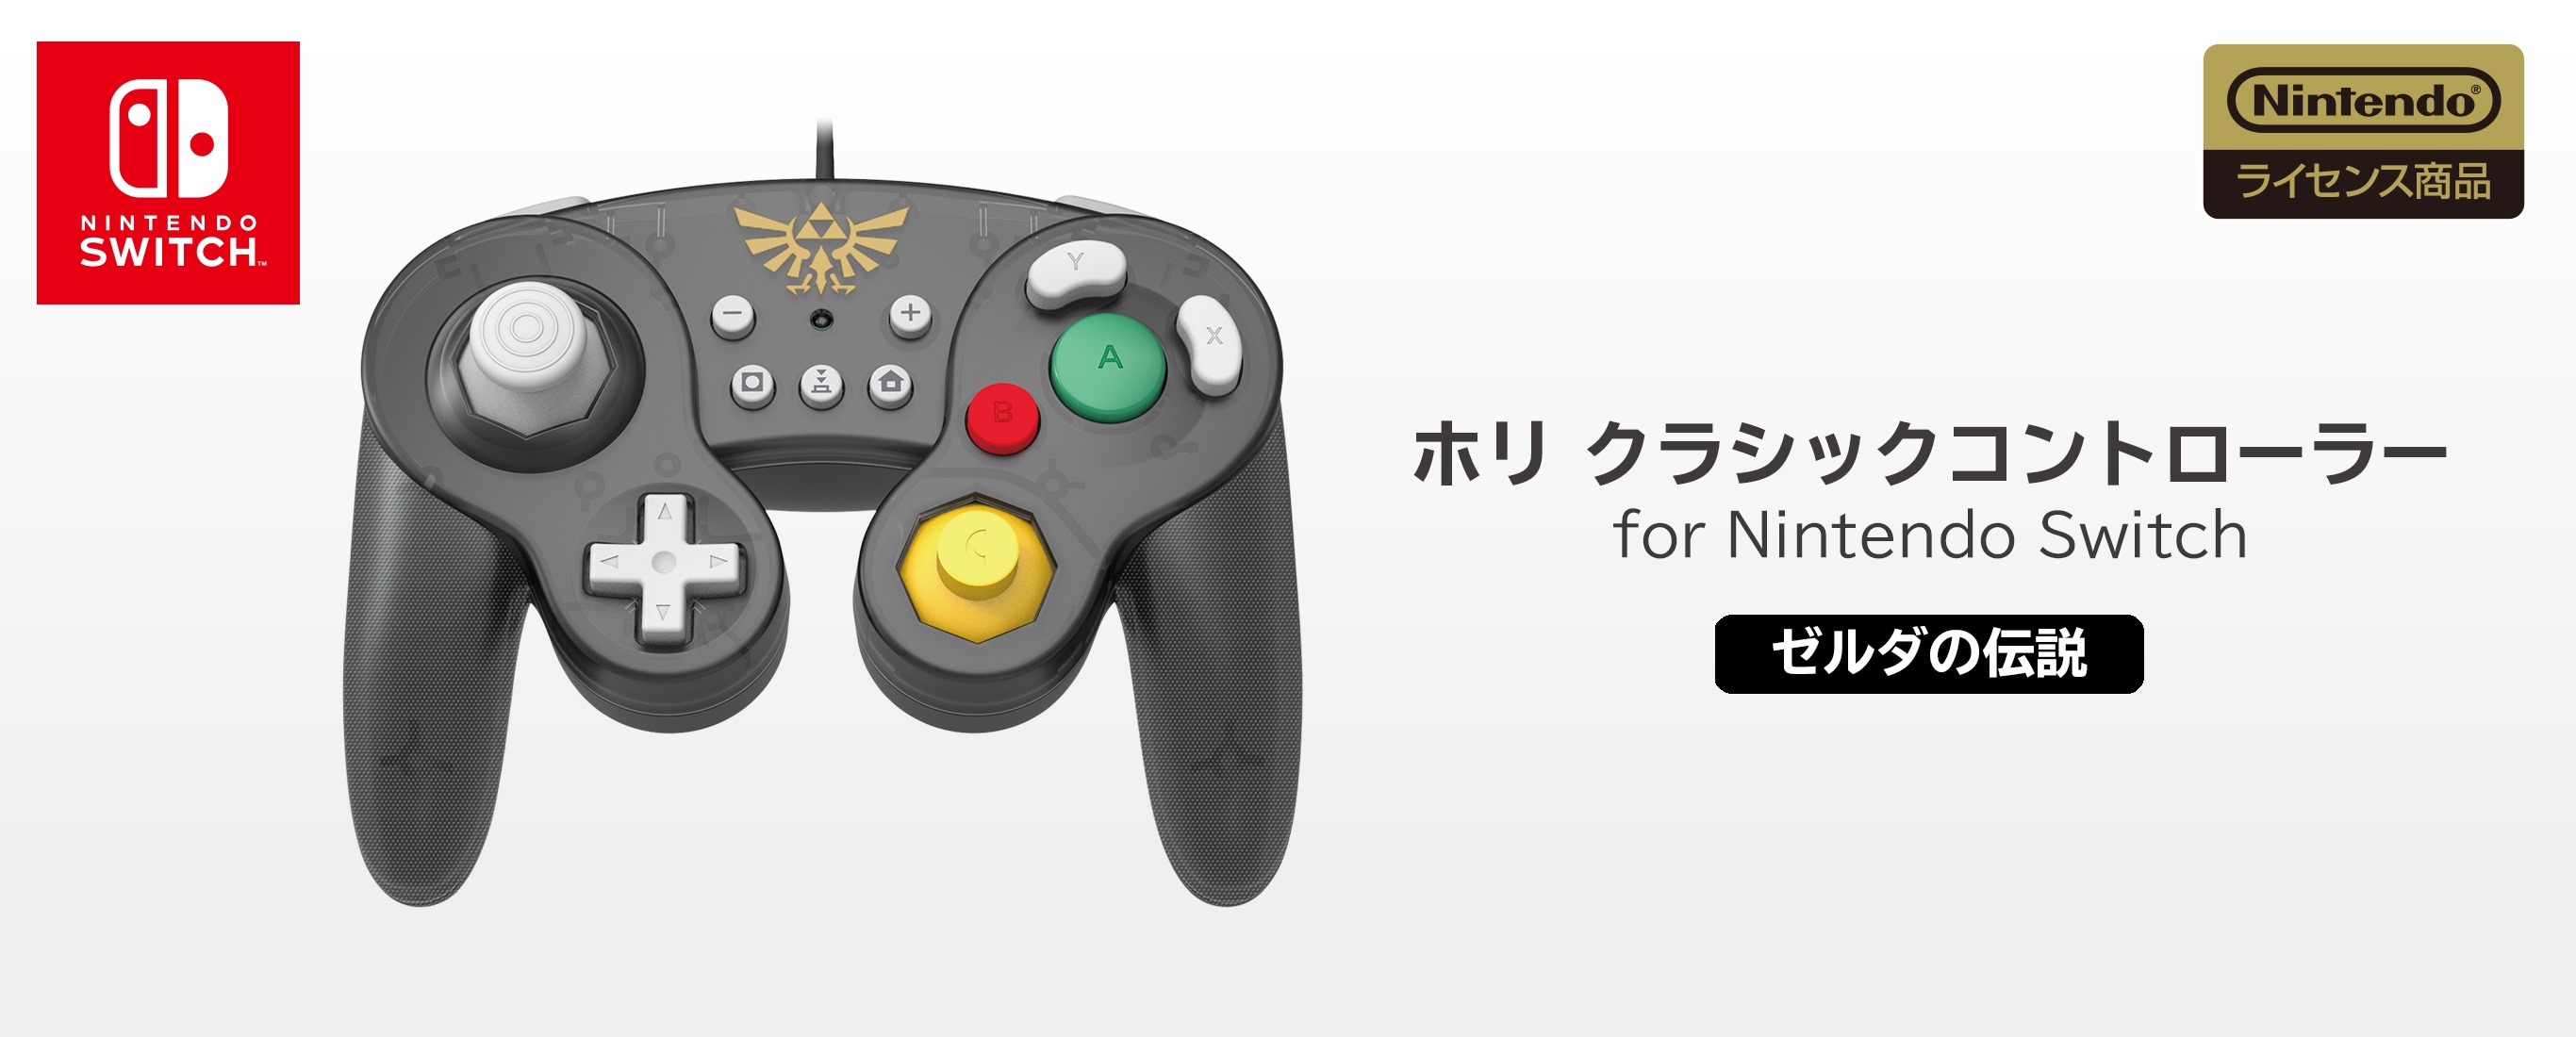 Hori To Release Classic GameCube-Style Controllers For Nintendo Switch In  October - Siliconera